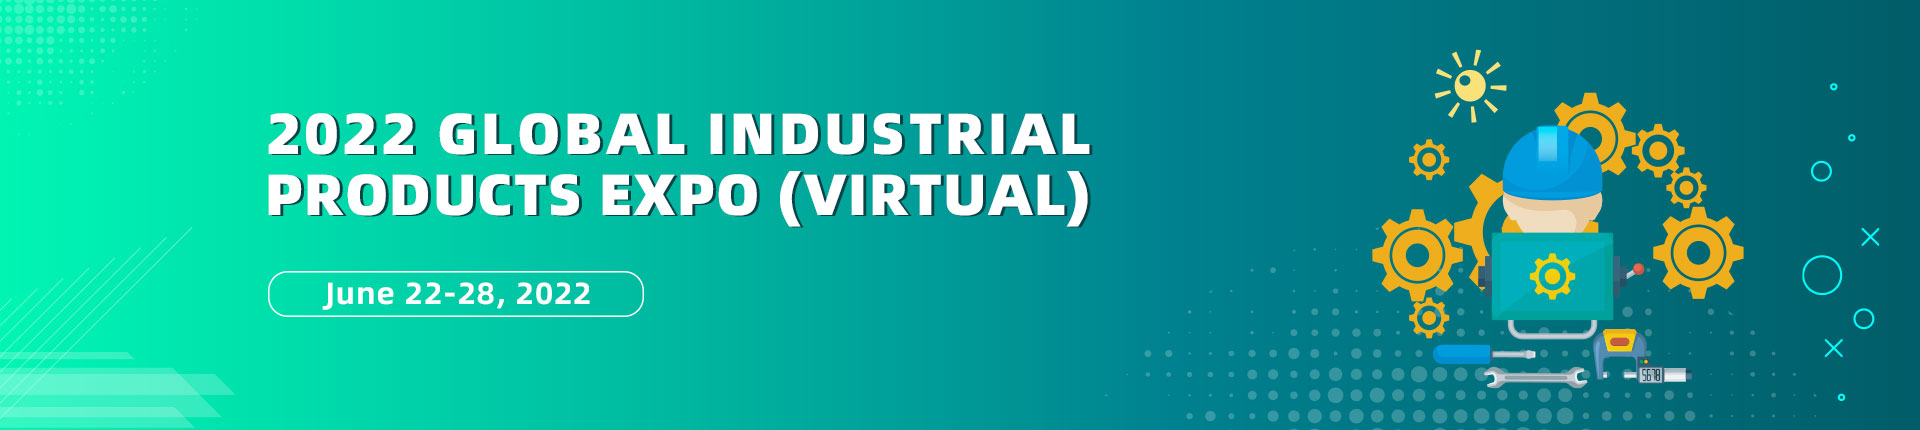 2022 Global Industrial Products Expo (Virtual) 